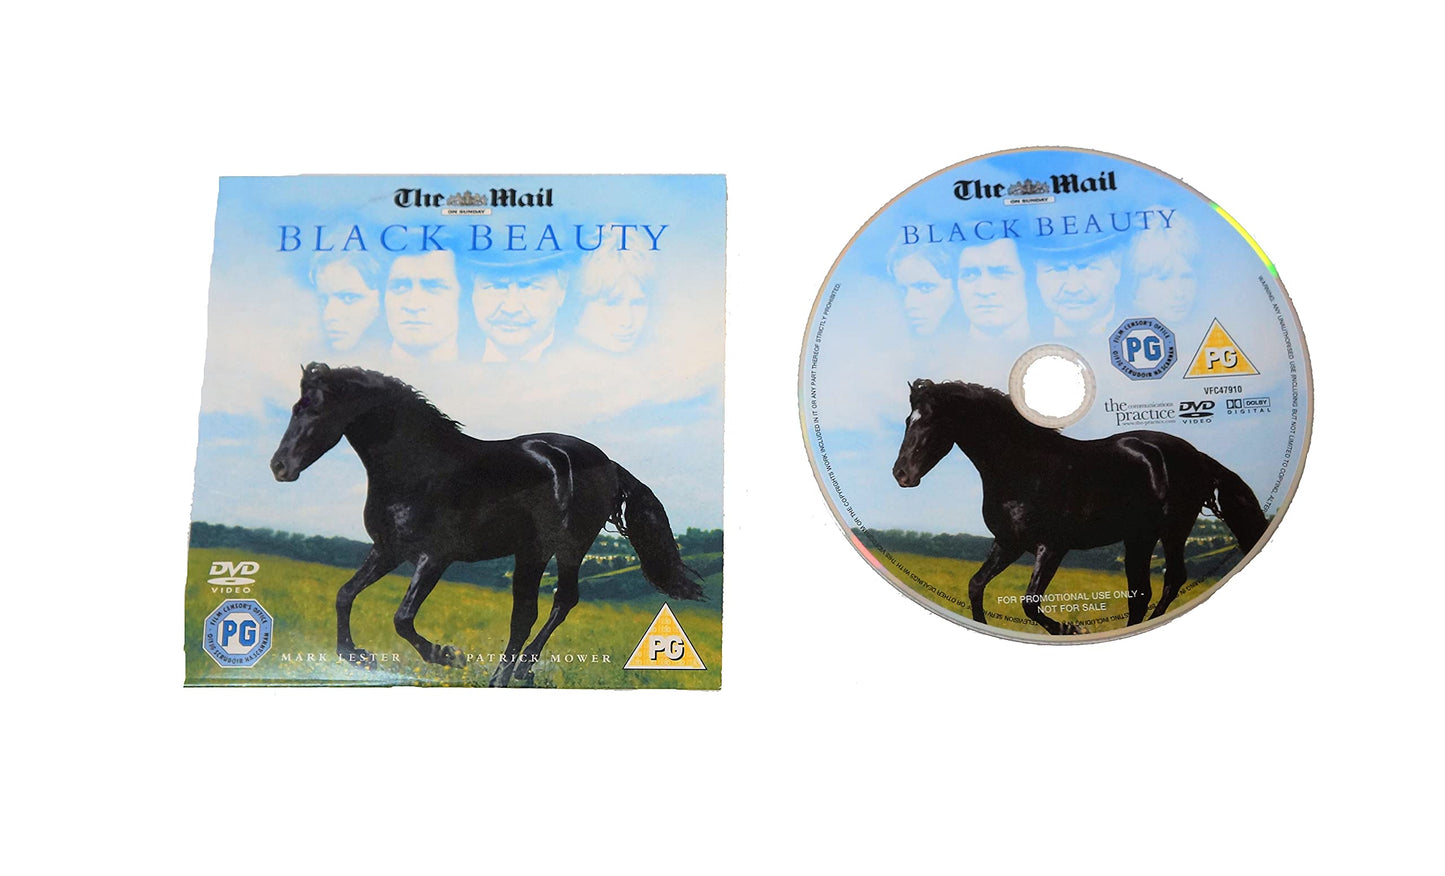 Vintage 1971 Black Beauty DVD - The Mail On Sunday Issue - Mark Lester, Patrick Mower - Shop Stock Room Find